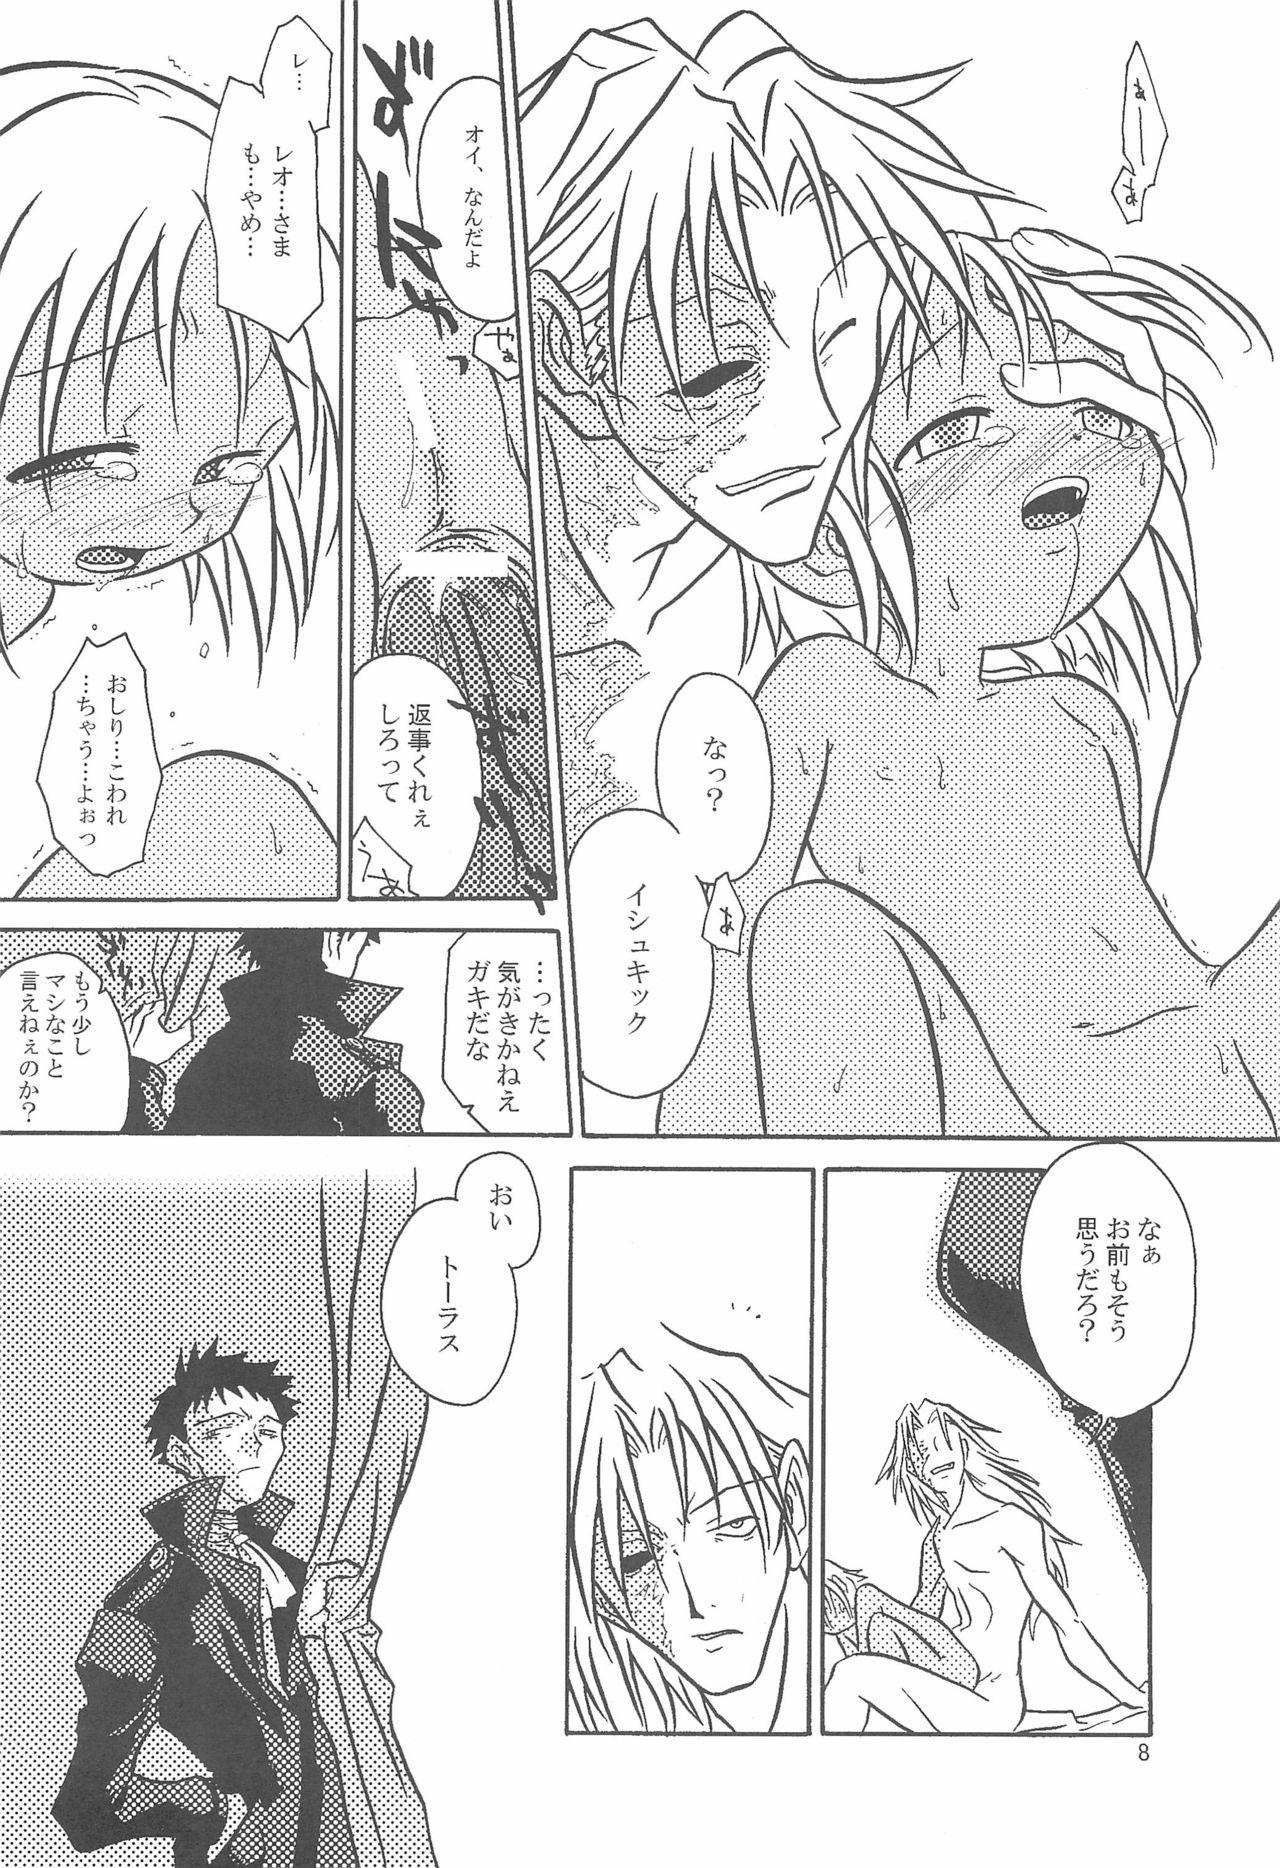 Putaria Baby Stardust - Persona 2 Gay Interracial - Page 8